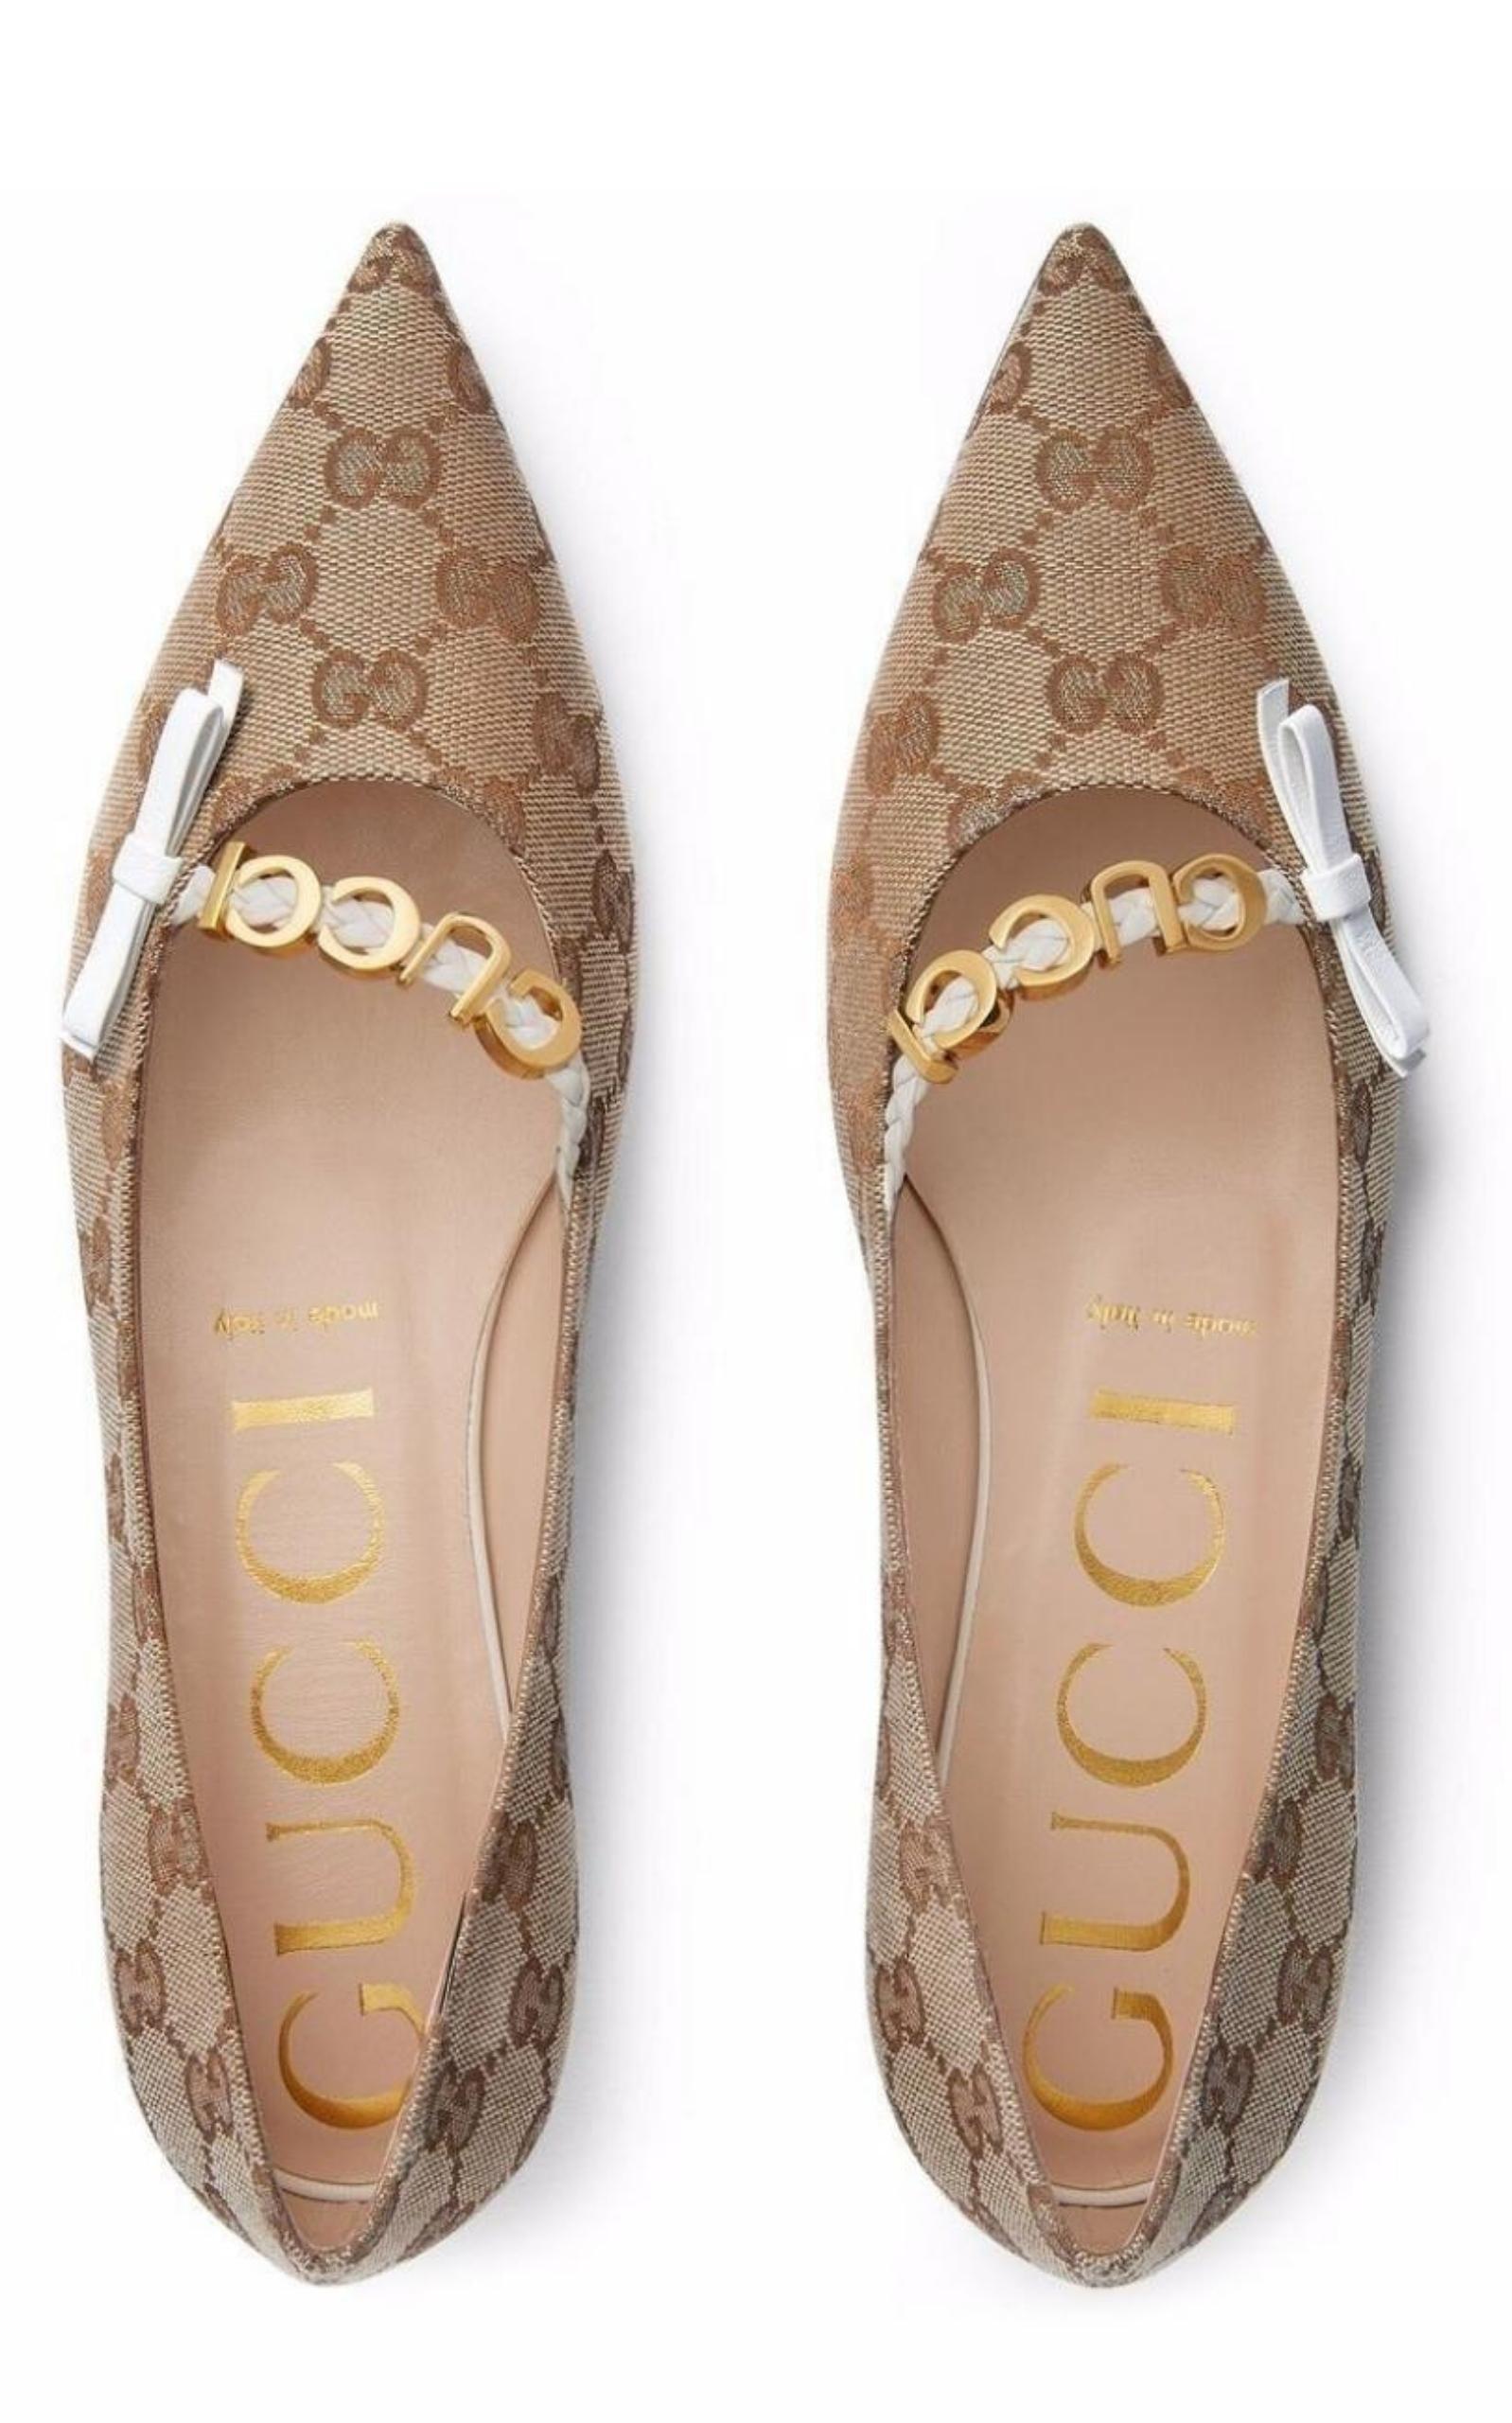 Gucci Double G Ballet Flats in Black